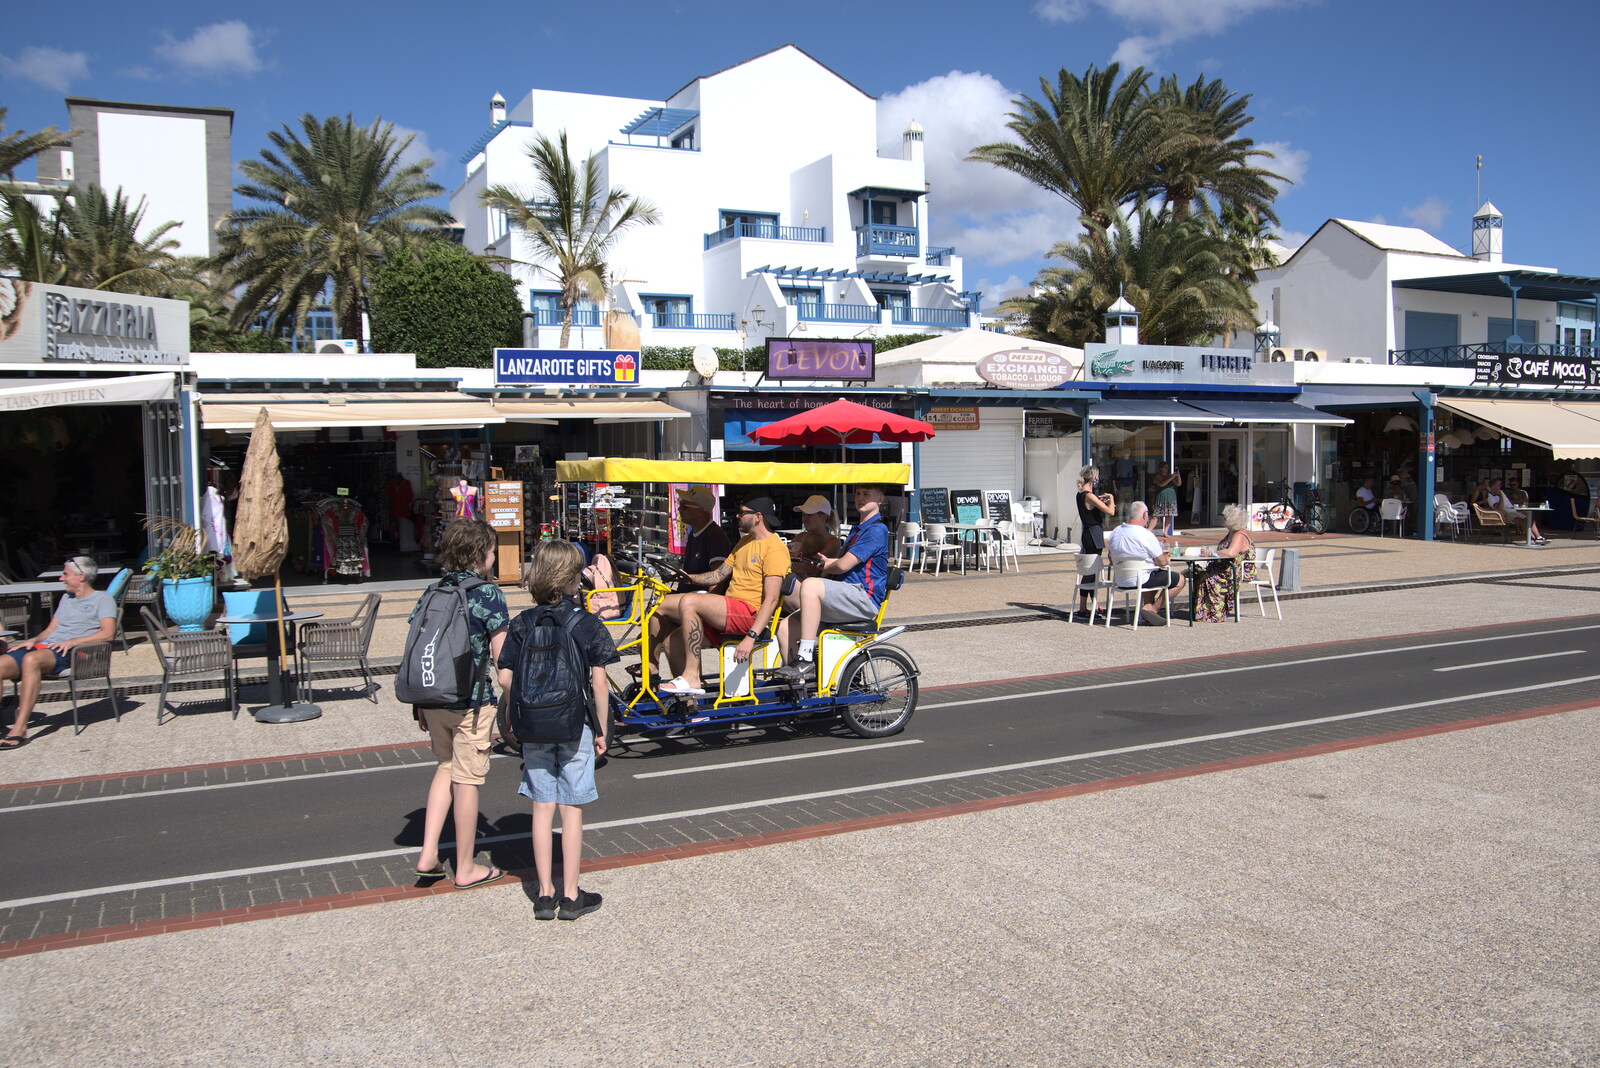 A self-propelled four-seat rickshaw goes by from Five Days in Lanzarote, Canary Islands, Spain - 24th October 2021